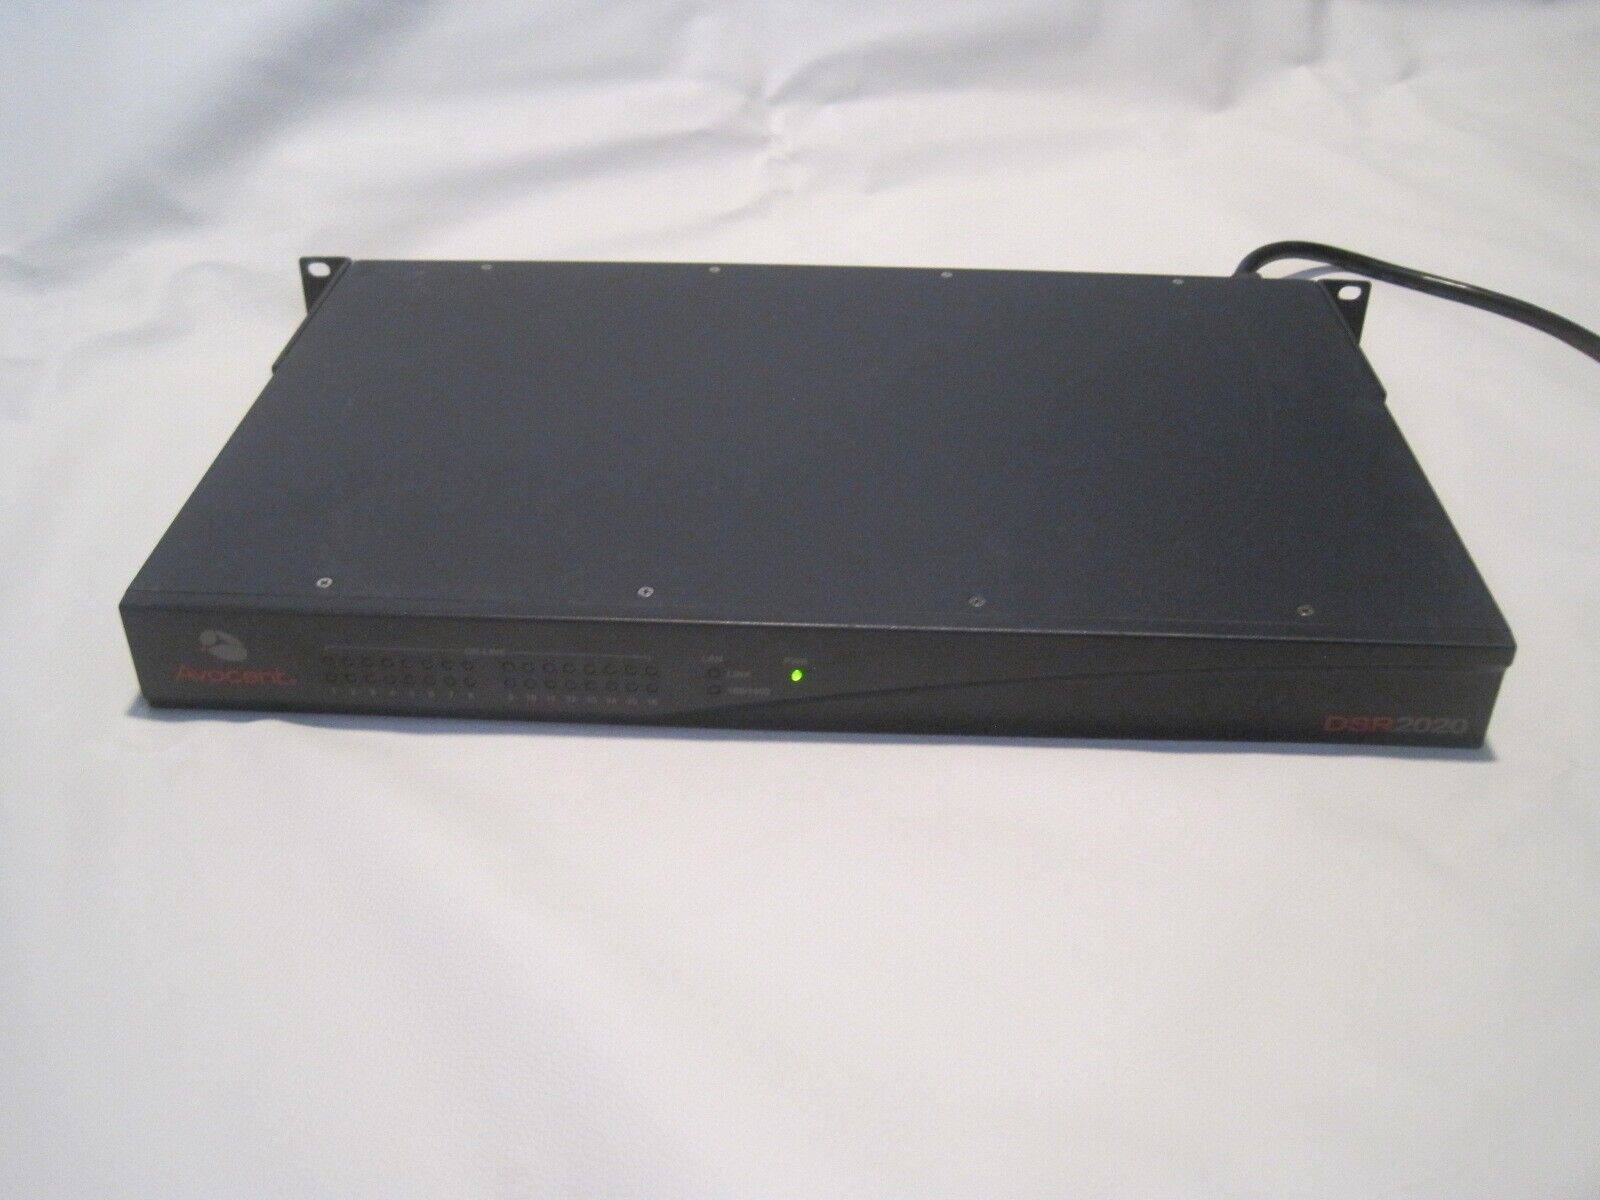 Avocent DSR2020 16-Port KVM Over IP Console Switch & Rackmount Ears & Power Cord